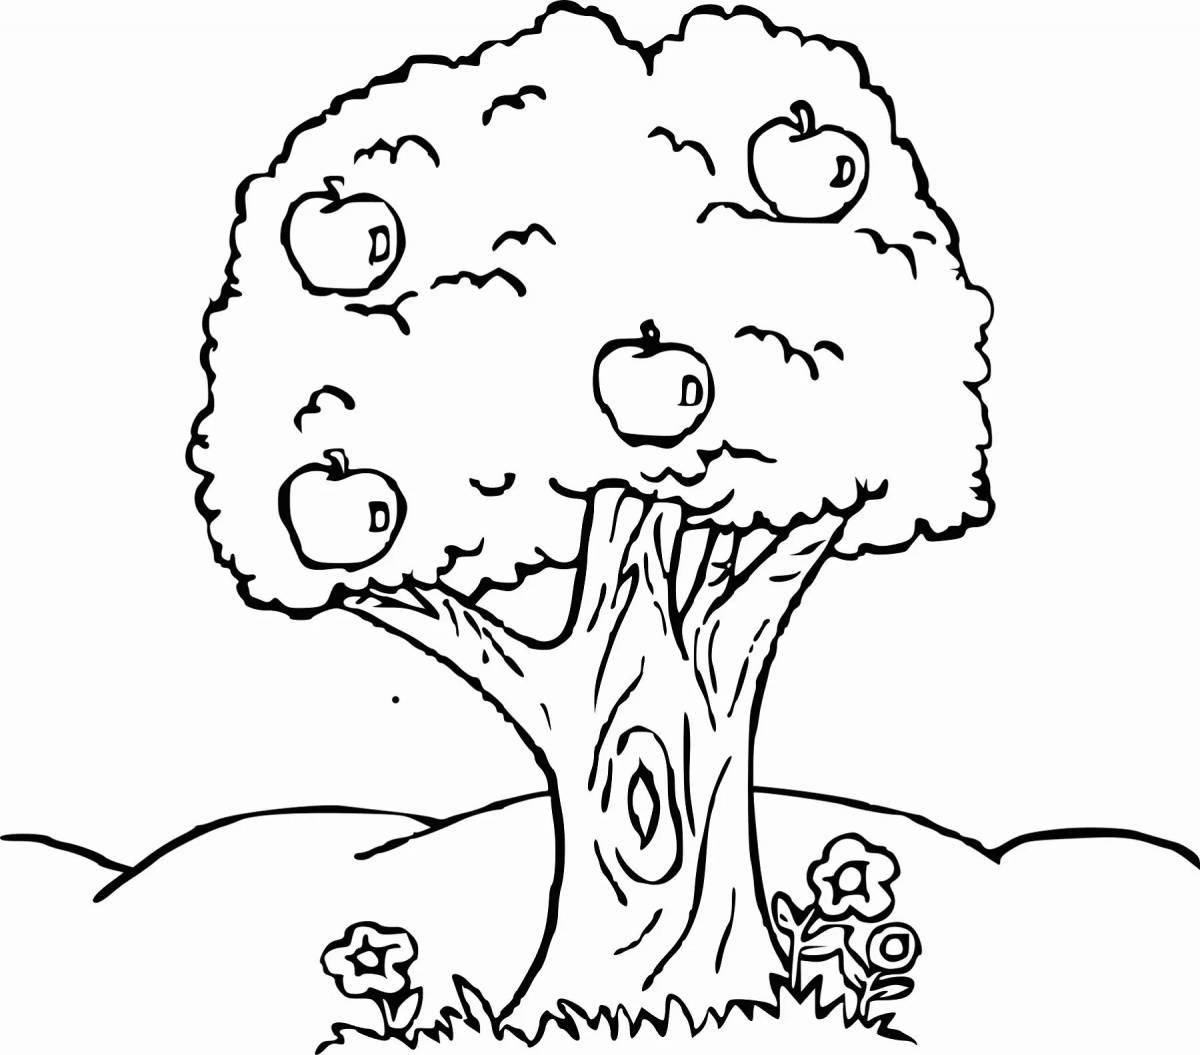 Innovative tree coloring book for 2-3 year olds